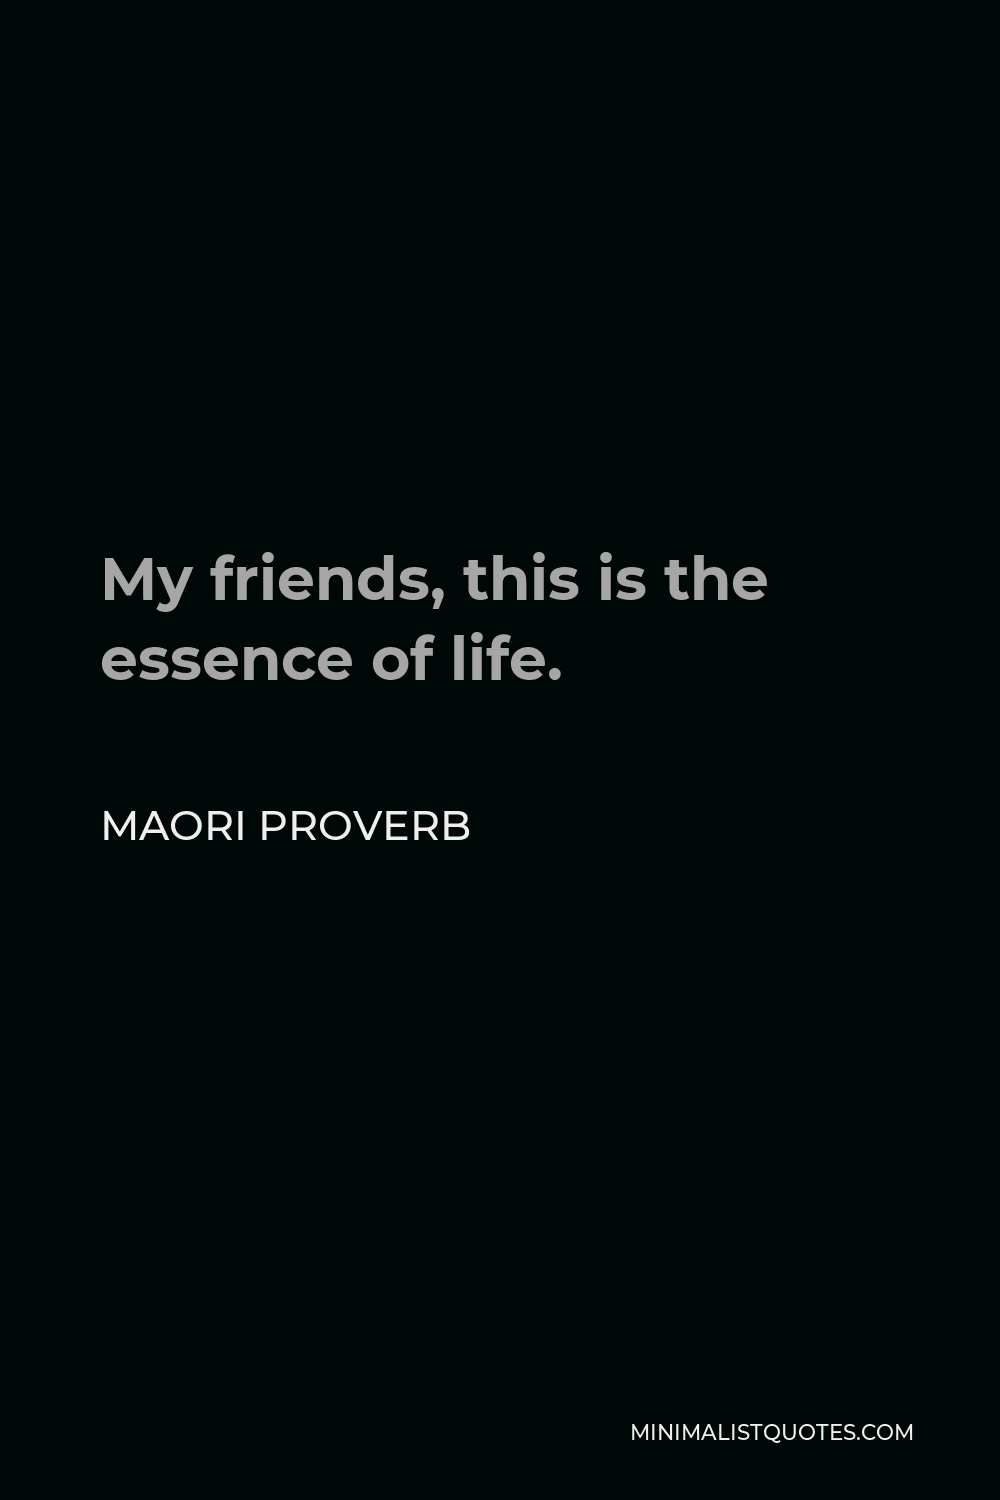 Maori Proverb Quote - My friends, this is the essence of life.